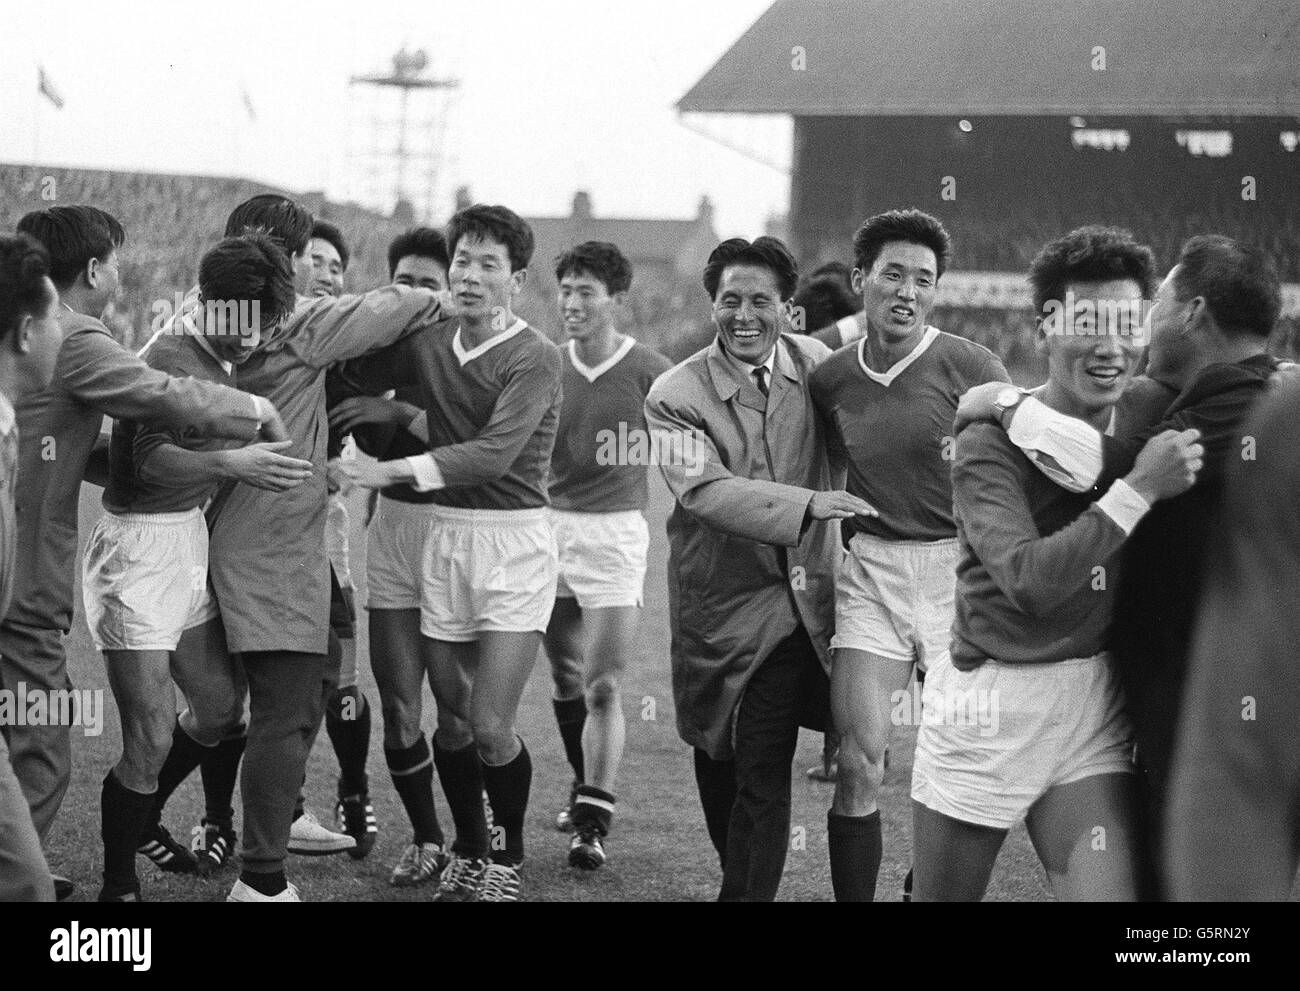 The North Korean footballers mobbed by supporters after their surprise 1-0 defeat of Italy in their 1966 World Cup Finals match at Ayresome Park, Middlesbrough. Second from left is the man who scored the vital goal - Pak Doo Ik. Stock Photo